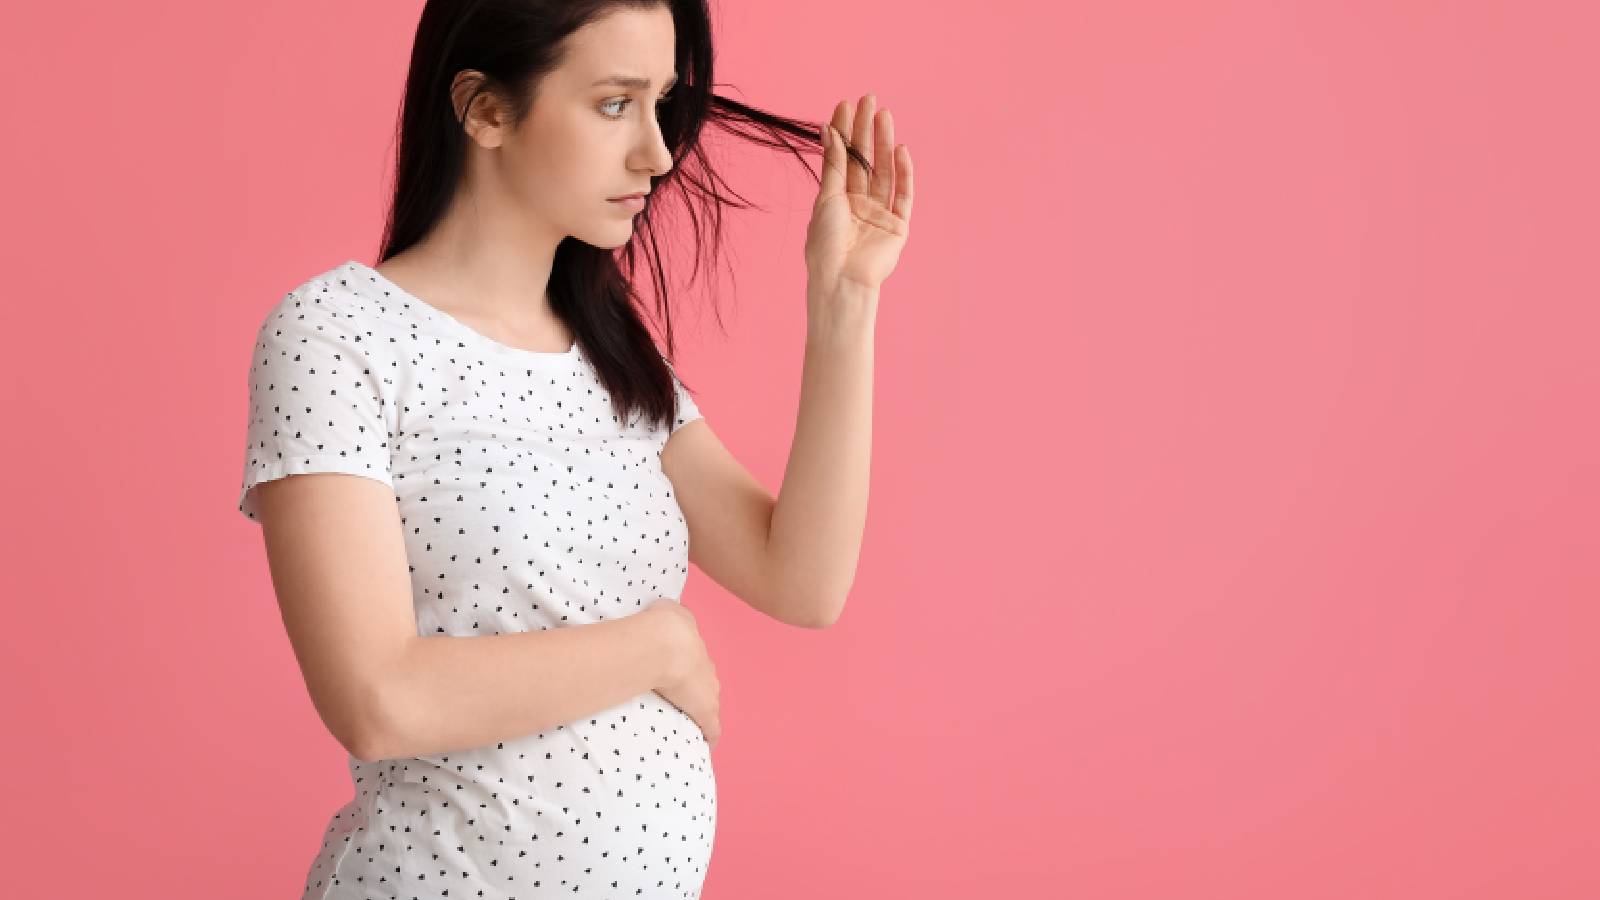 Colouring hair in pregnancy: It is safe?